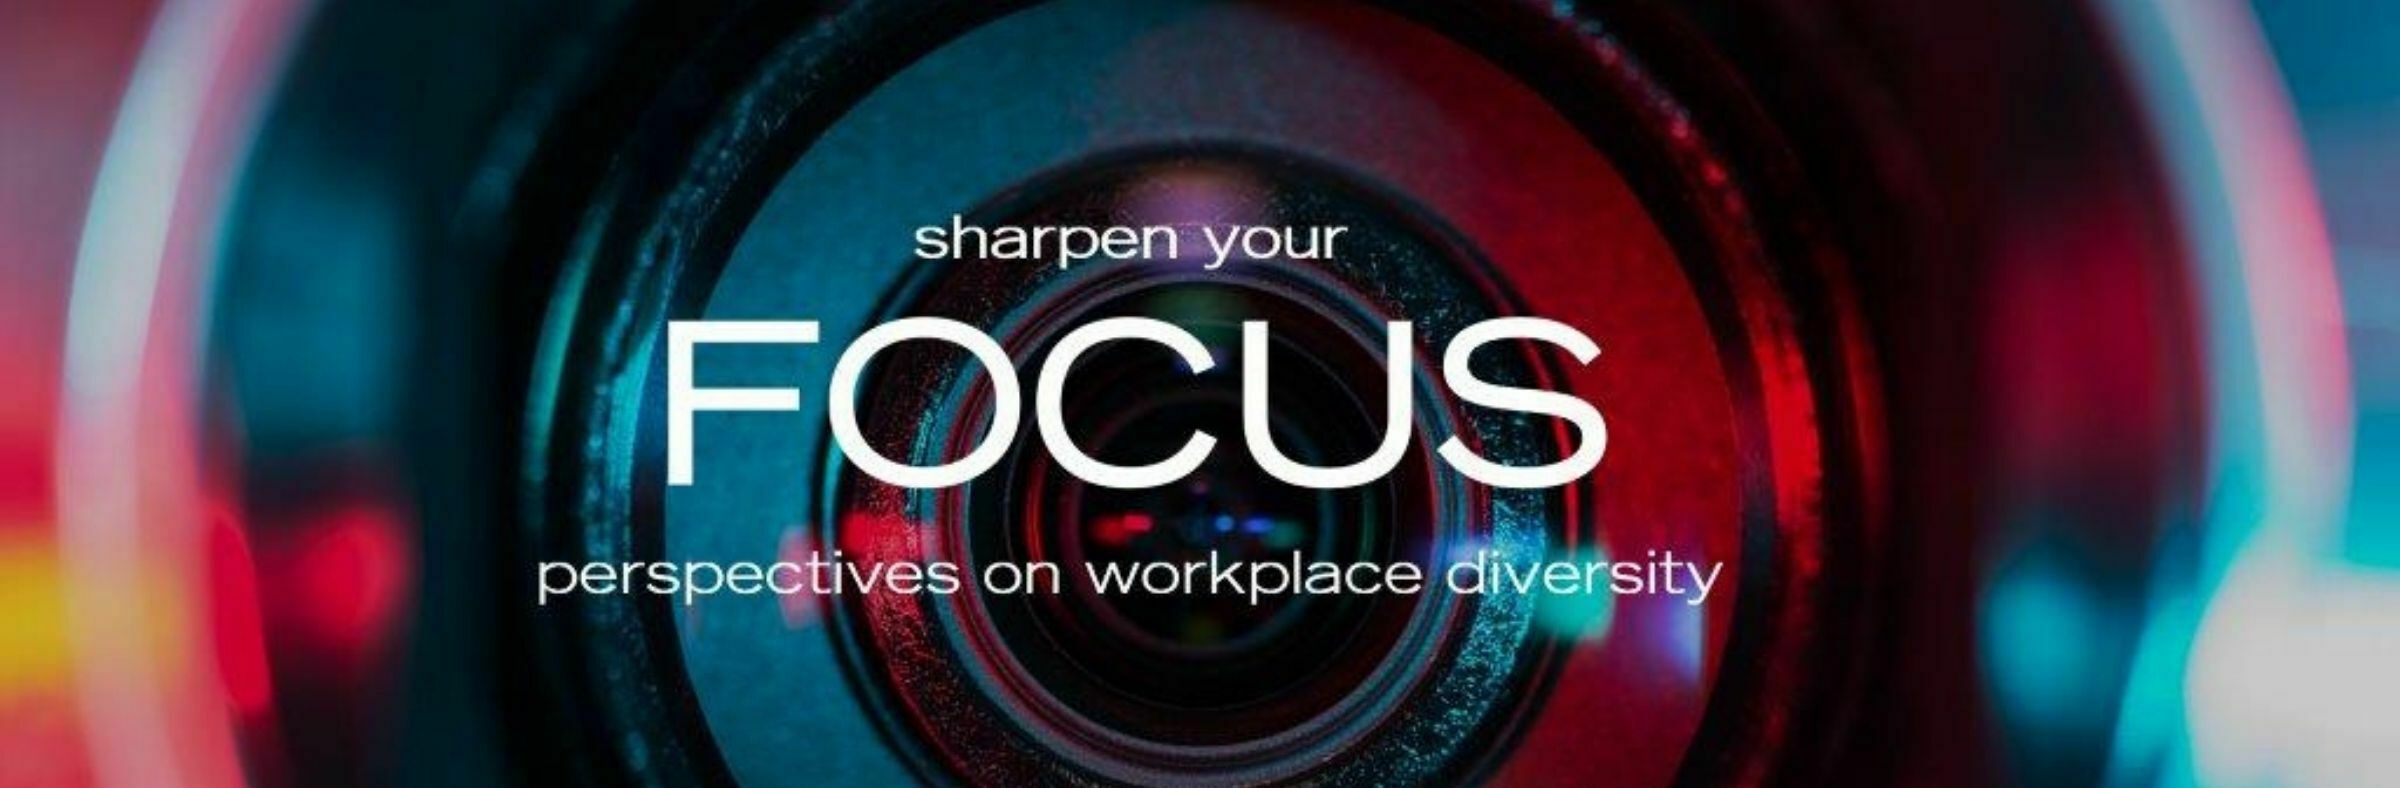 Sharpen Your FOCUS: Perspectives on Workplace Diversity 